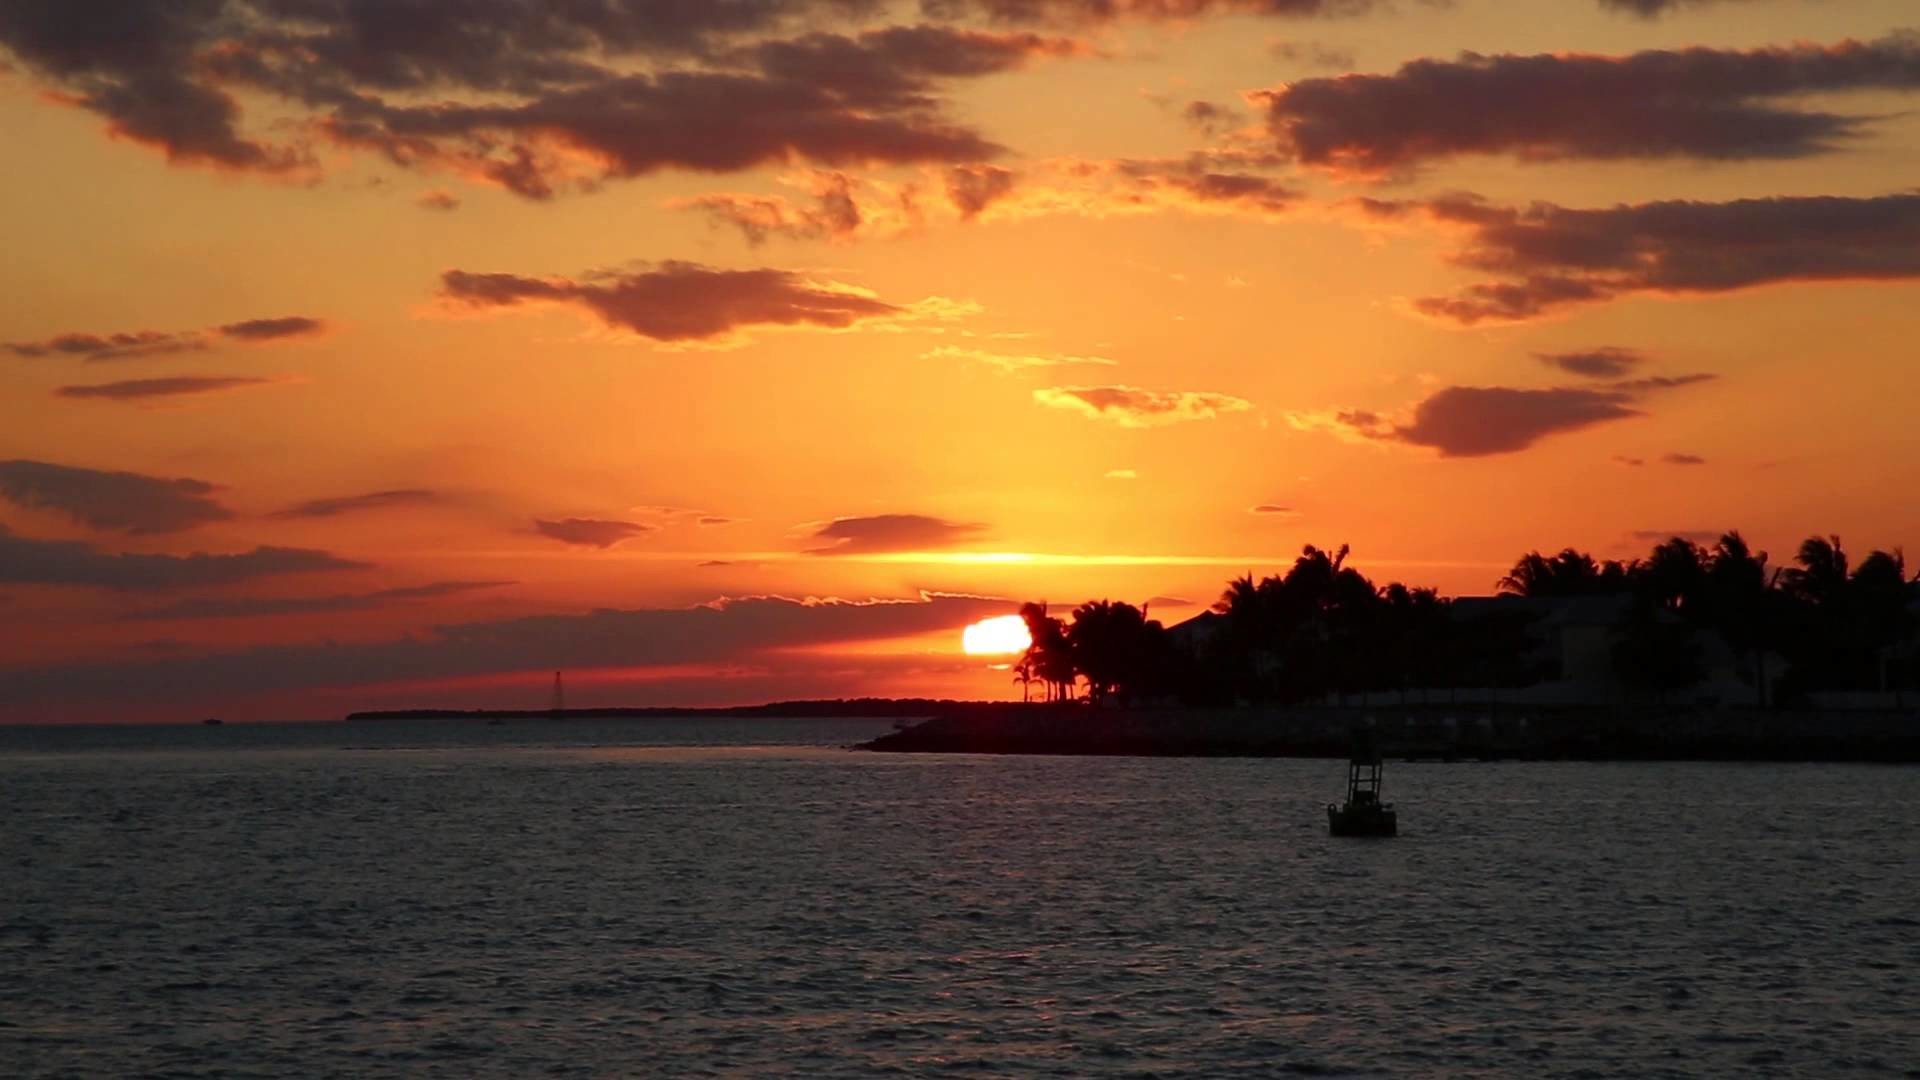 1920x1080 Key West Sunset Celebration in 2013 at Mallory Square is nice. - YouTube